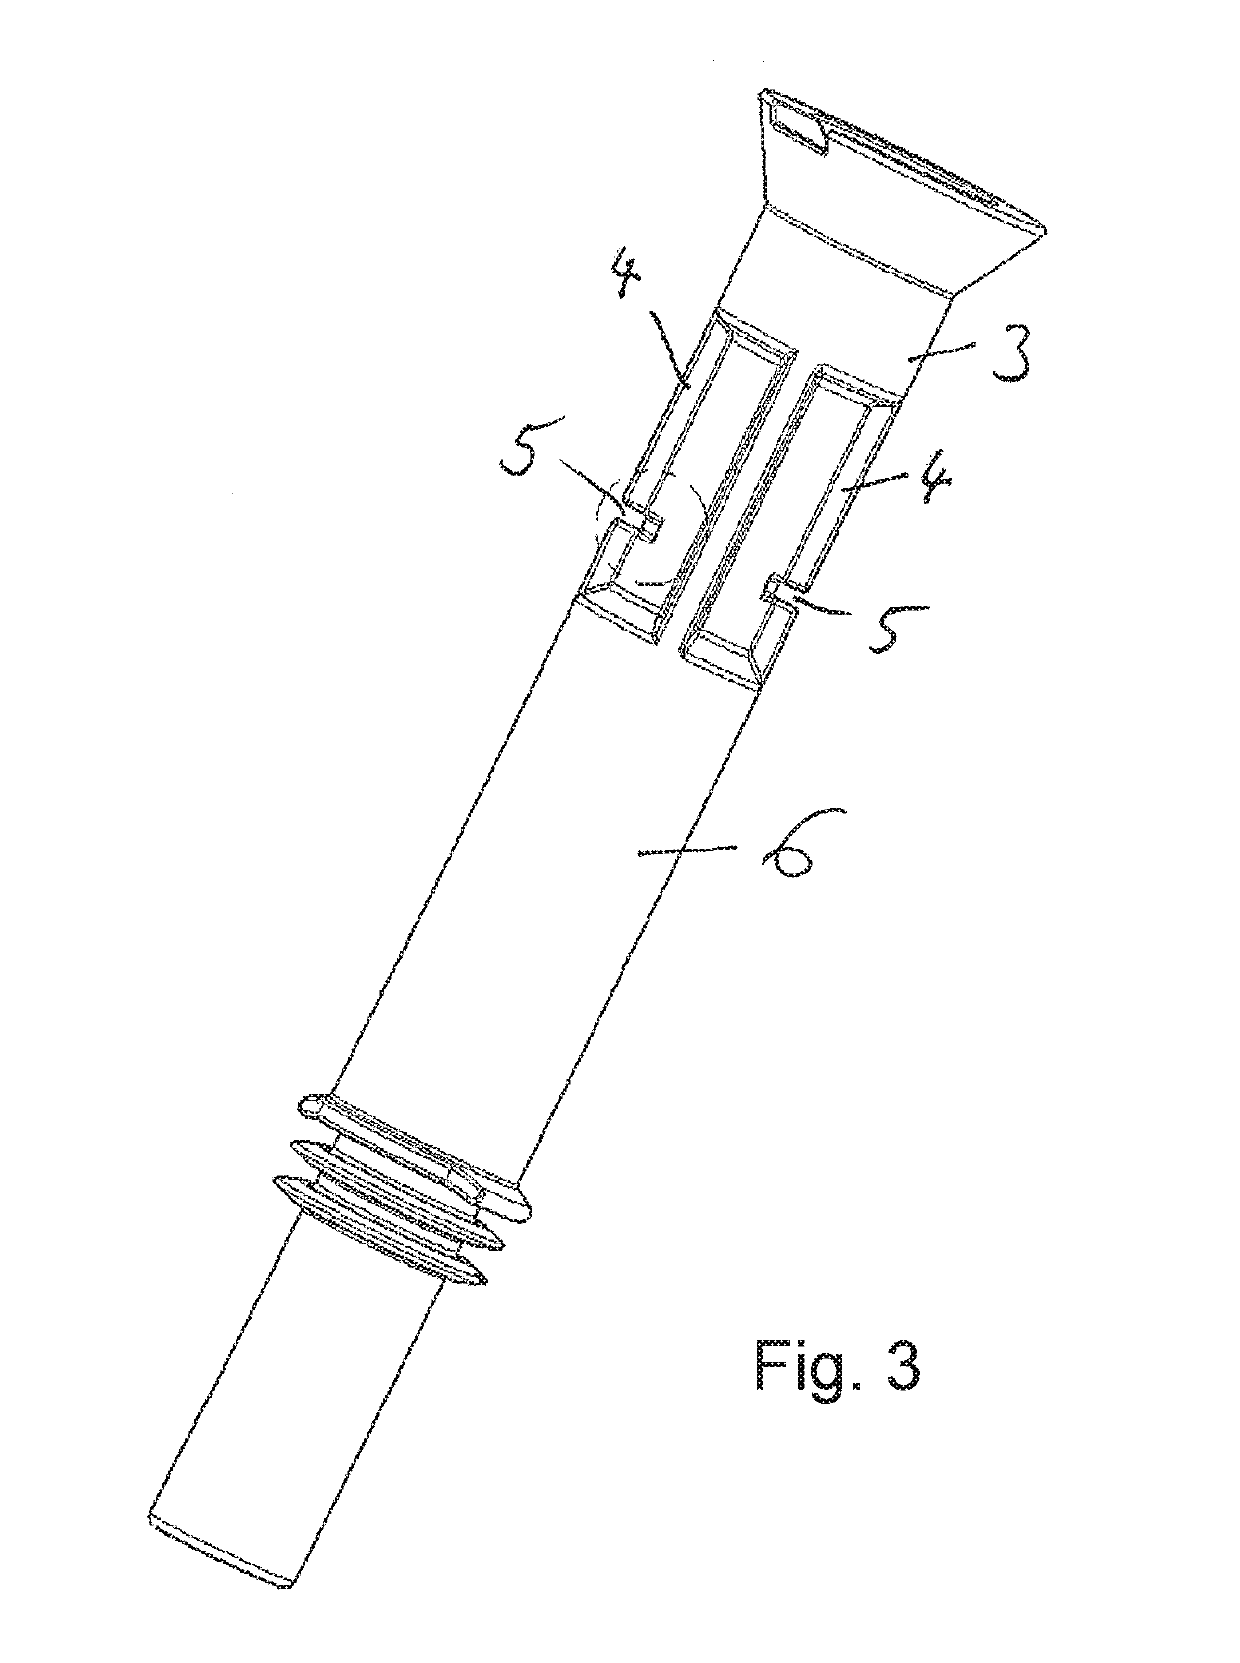 Connector plug for connecting an ignition coil to a spark plug